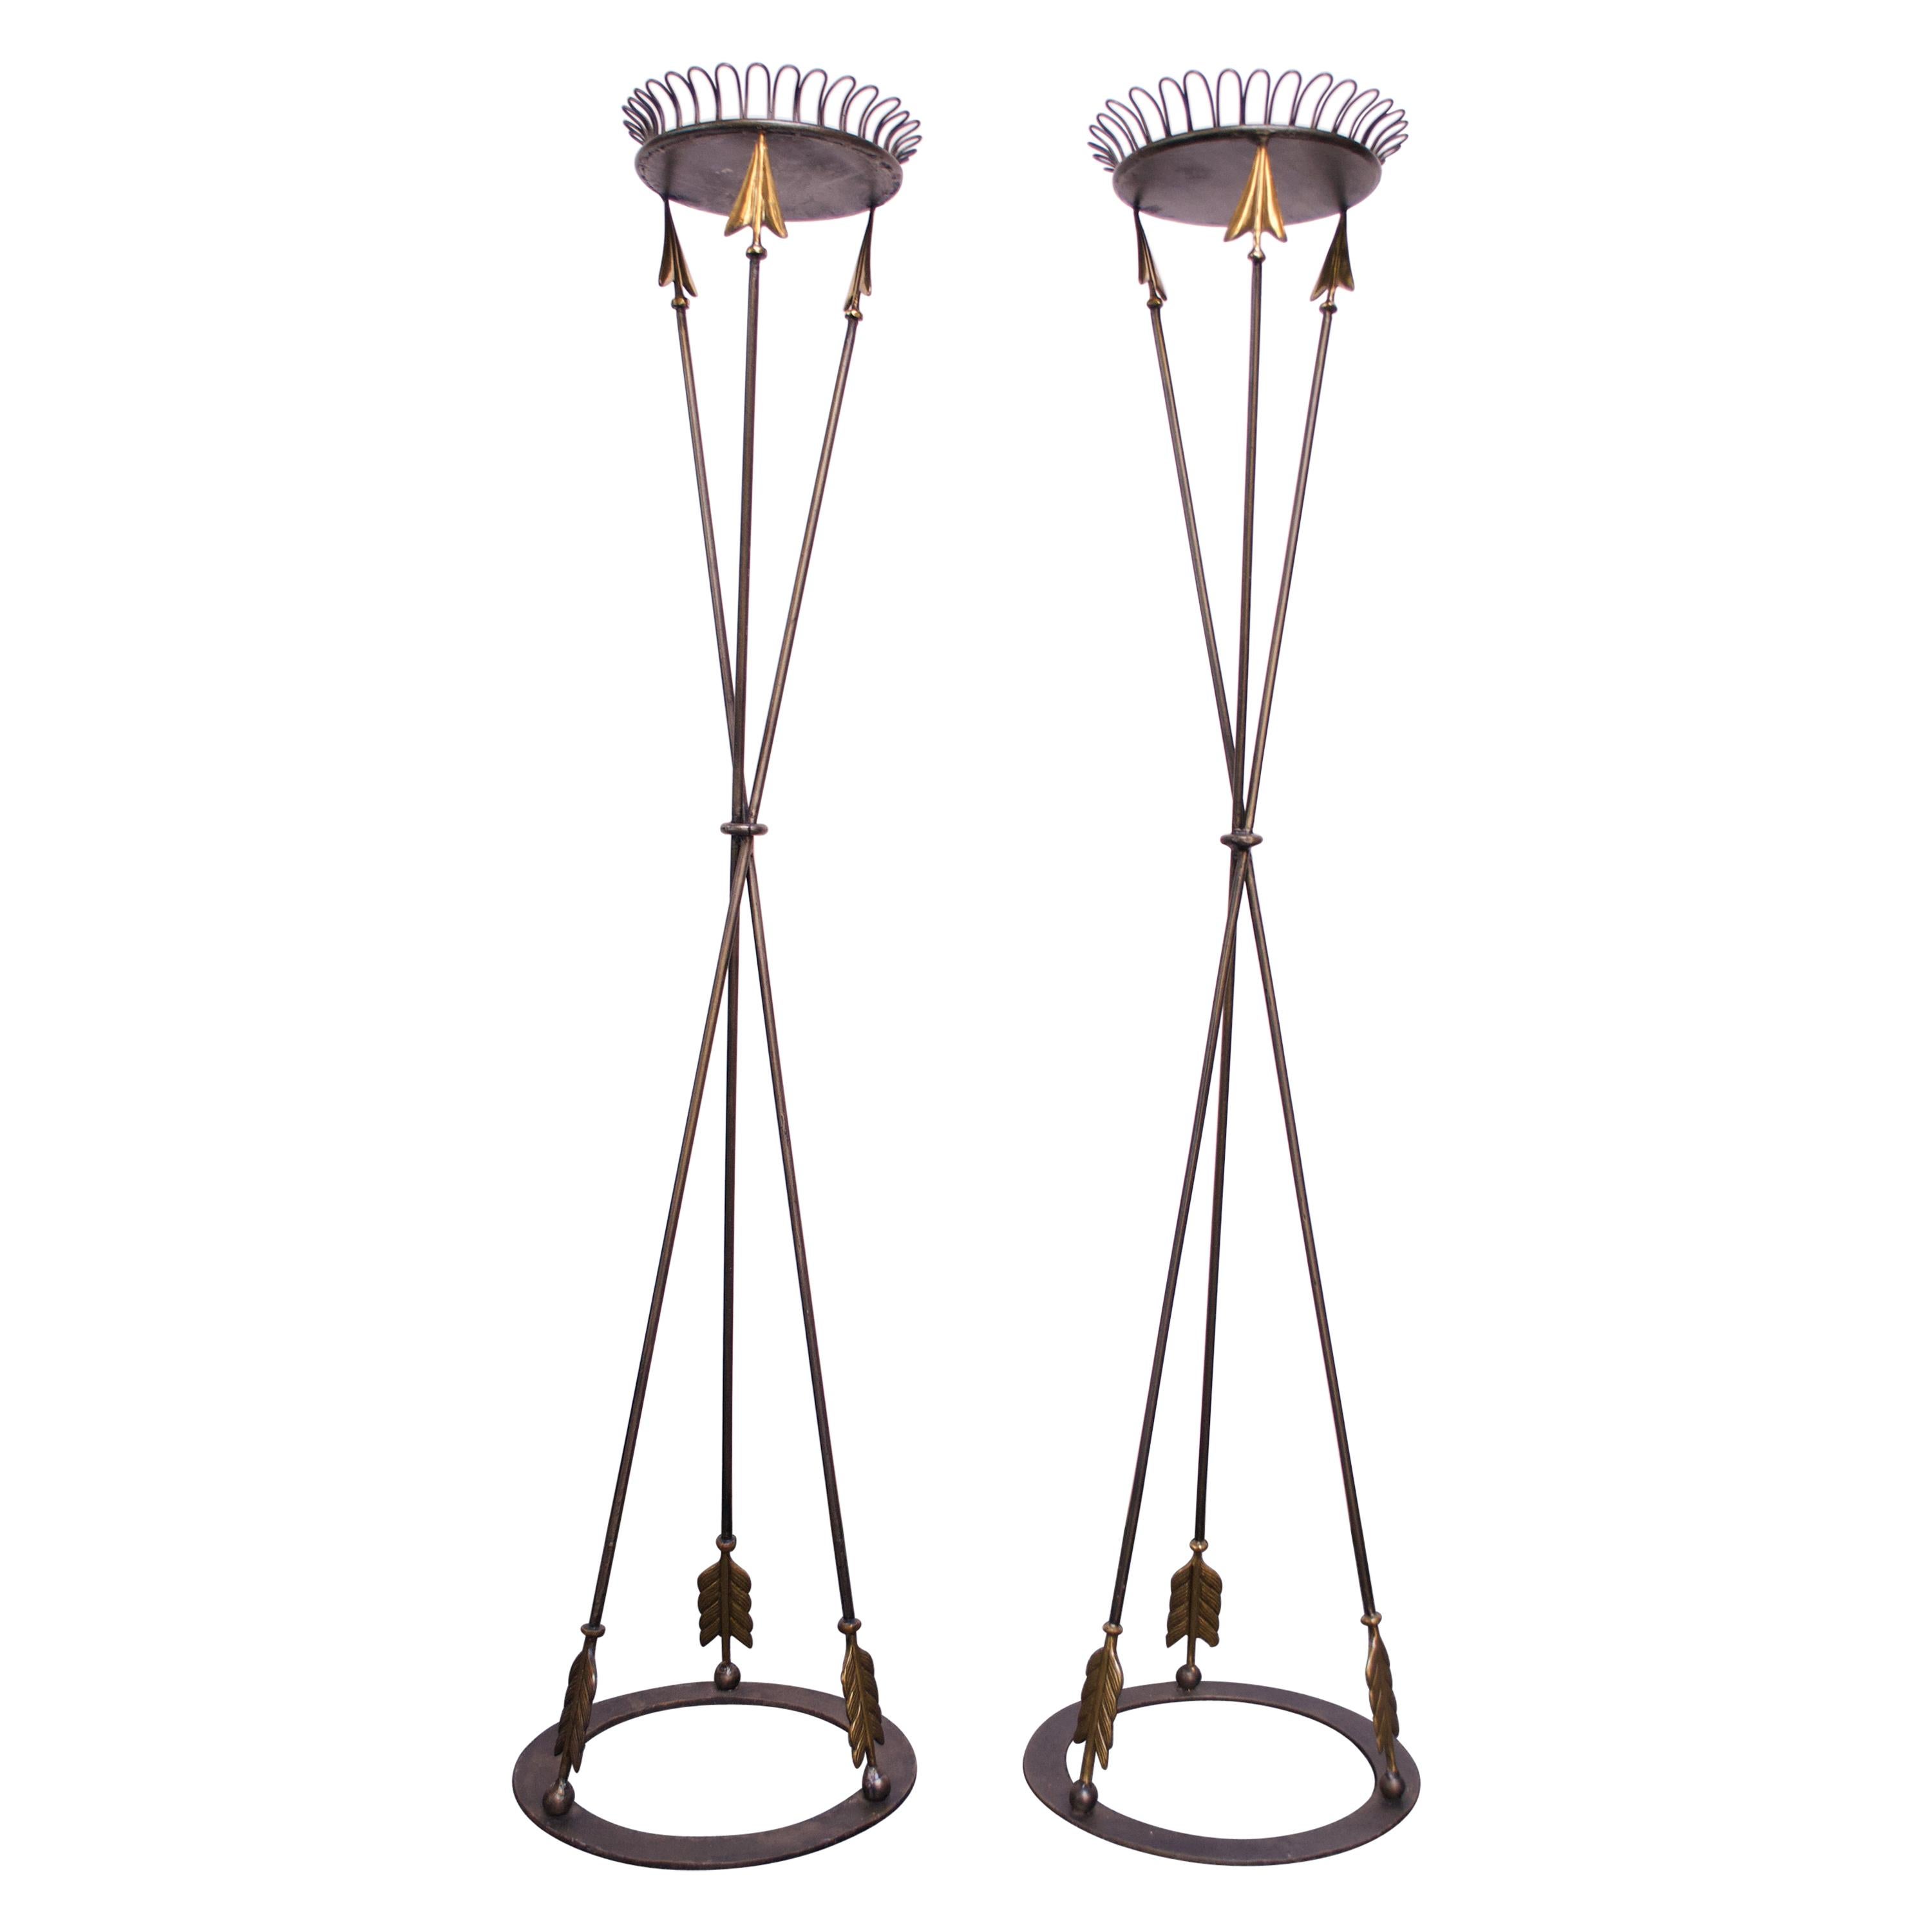 Pair of Maitland Smith Neoclassical Iron "Arrow" Torchières / Plant Stands